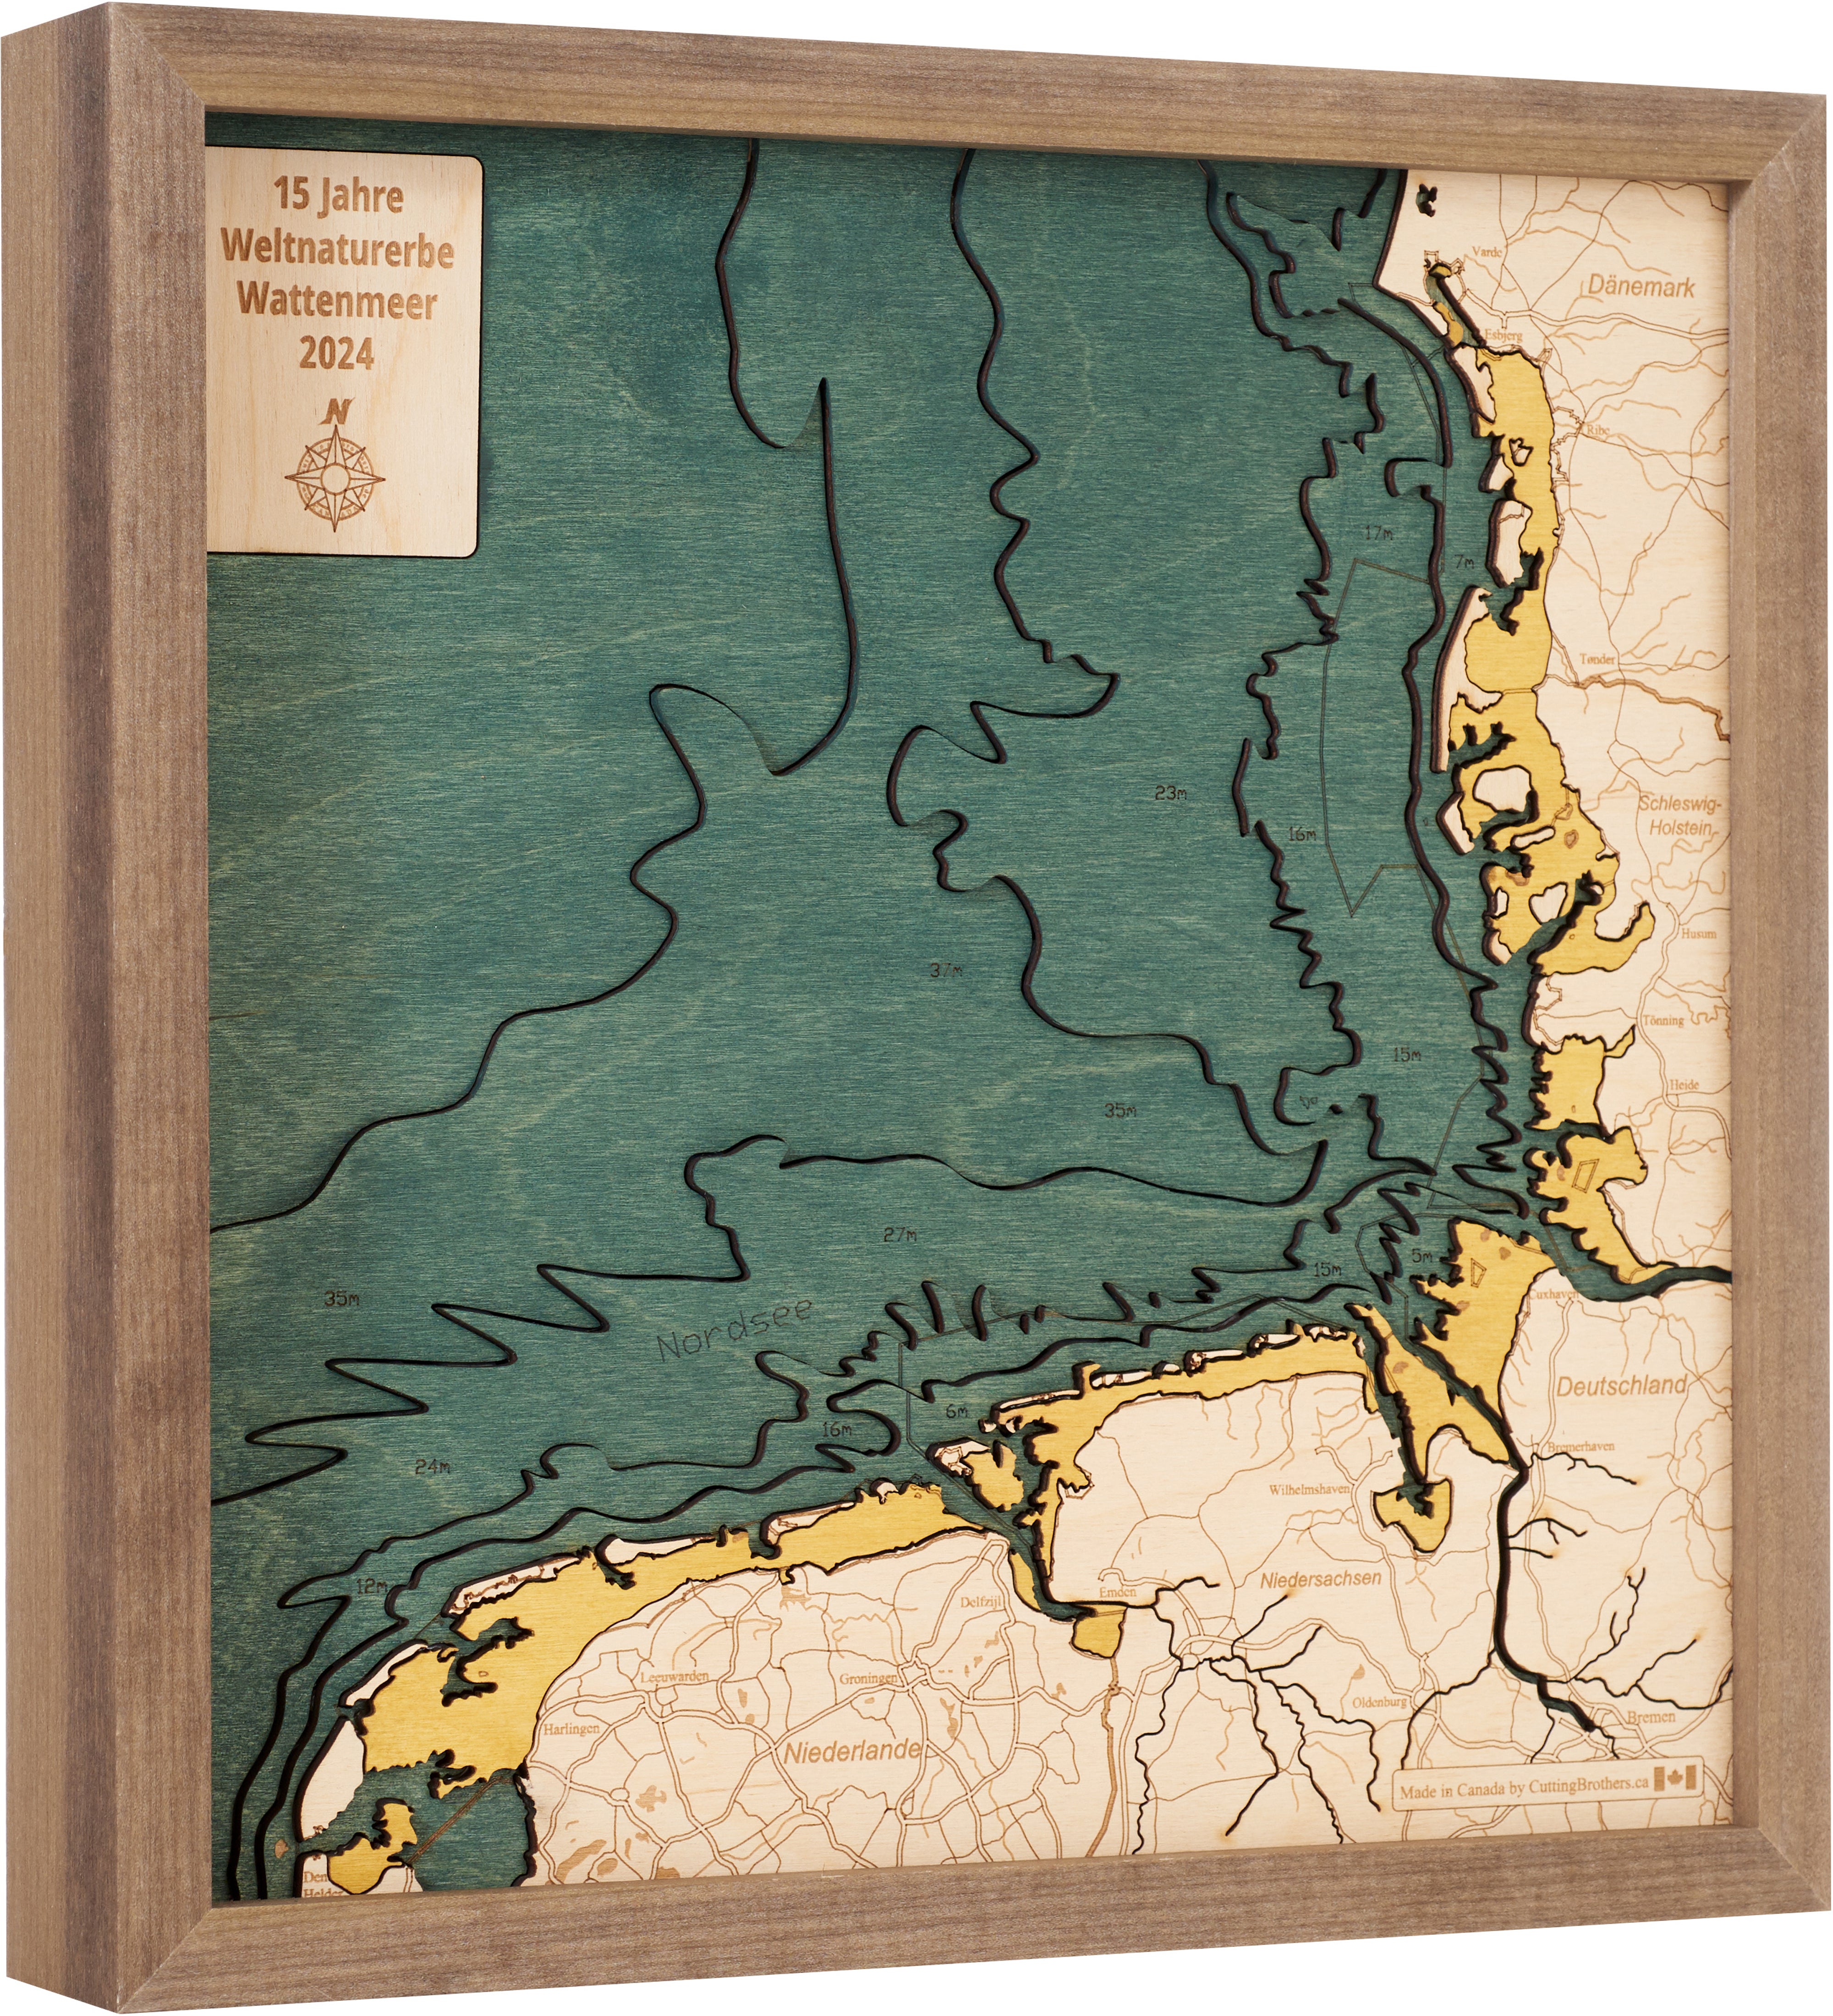 WADDEN SEA 15 Years of UNESCO World Heritage 3D Wooden Wall Map - Version S 